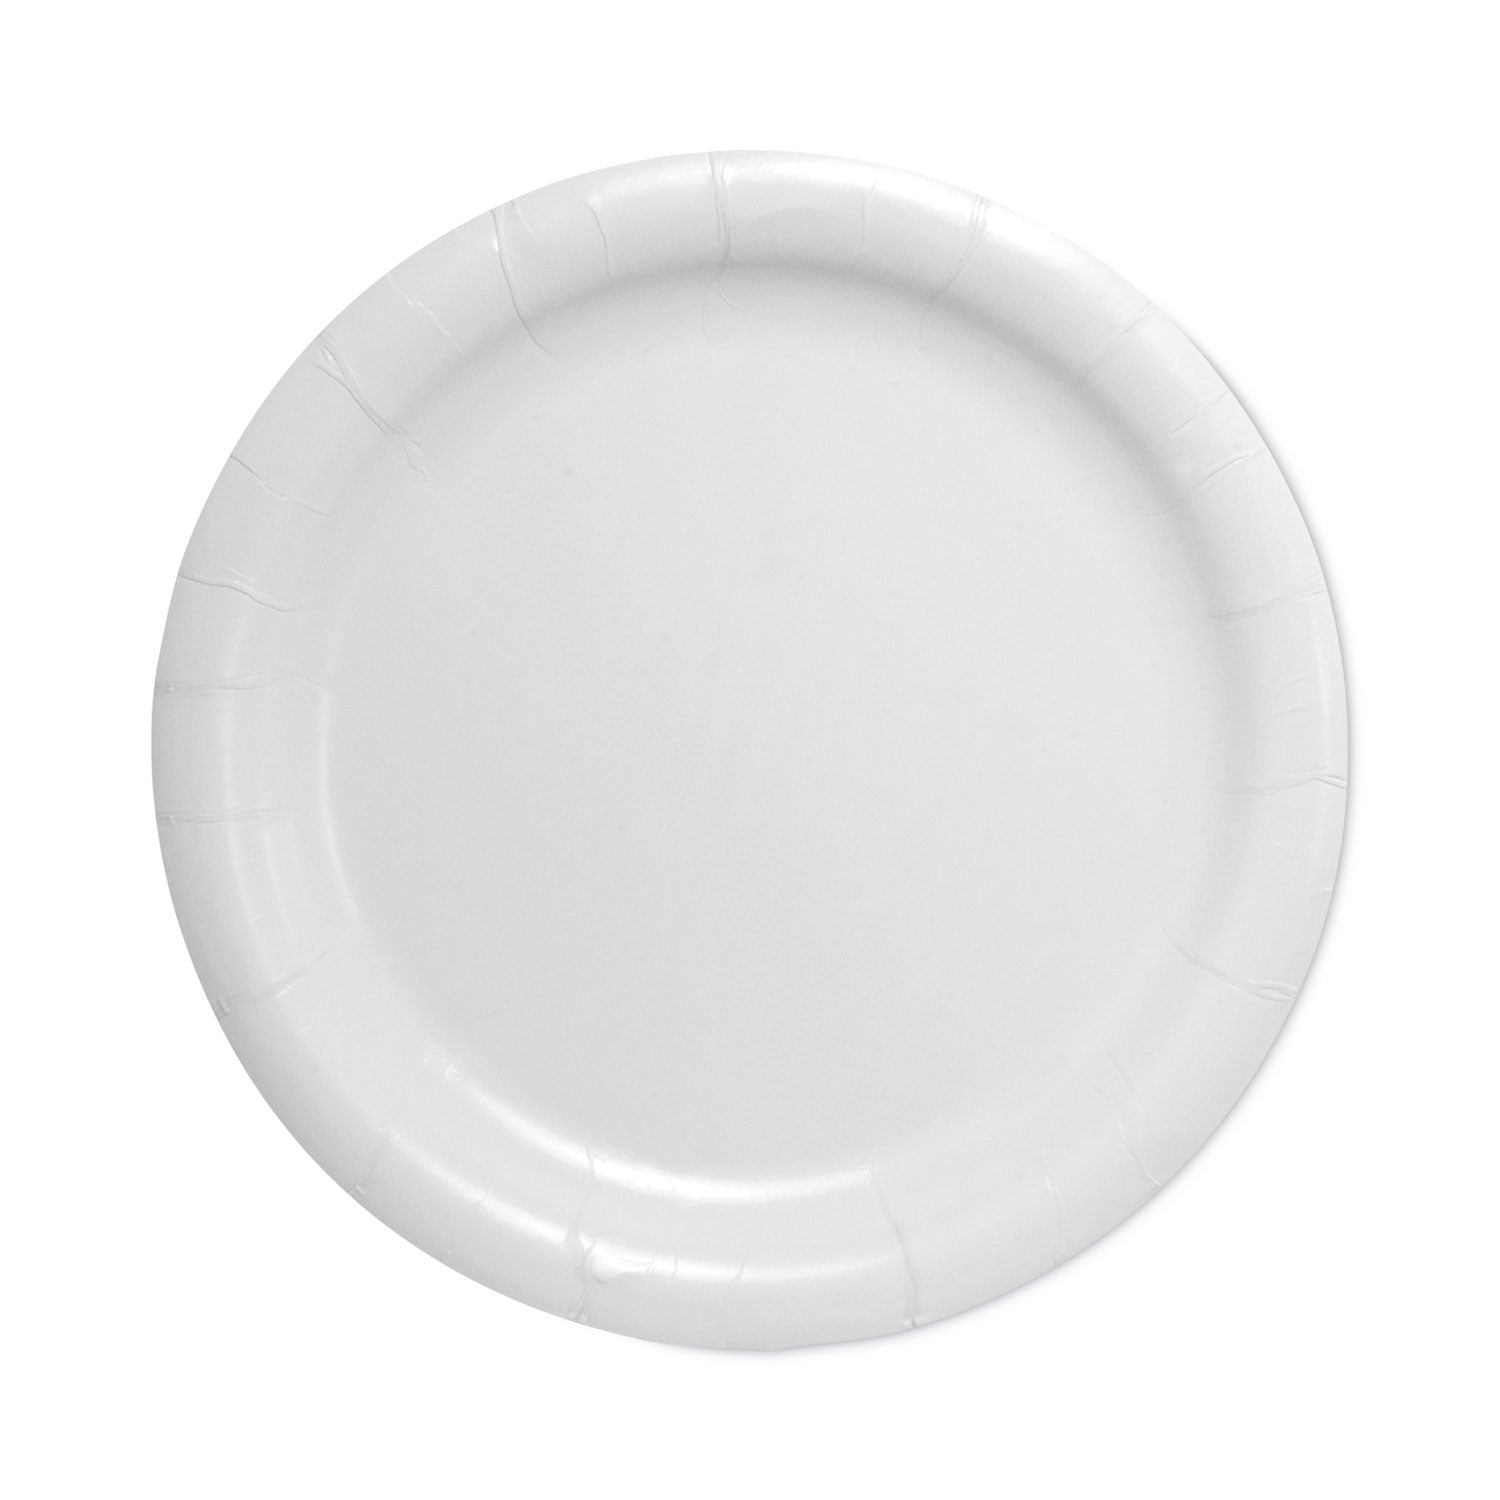 bare-eco-forward-clay-coated-paper-dinnerware-proplanet-seal-plate-9-dia-white-500-carton_scchp9s - 1